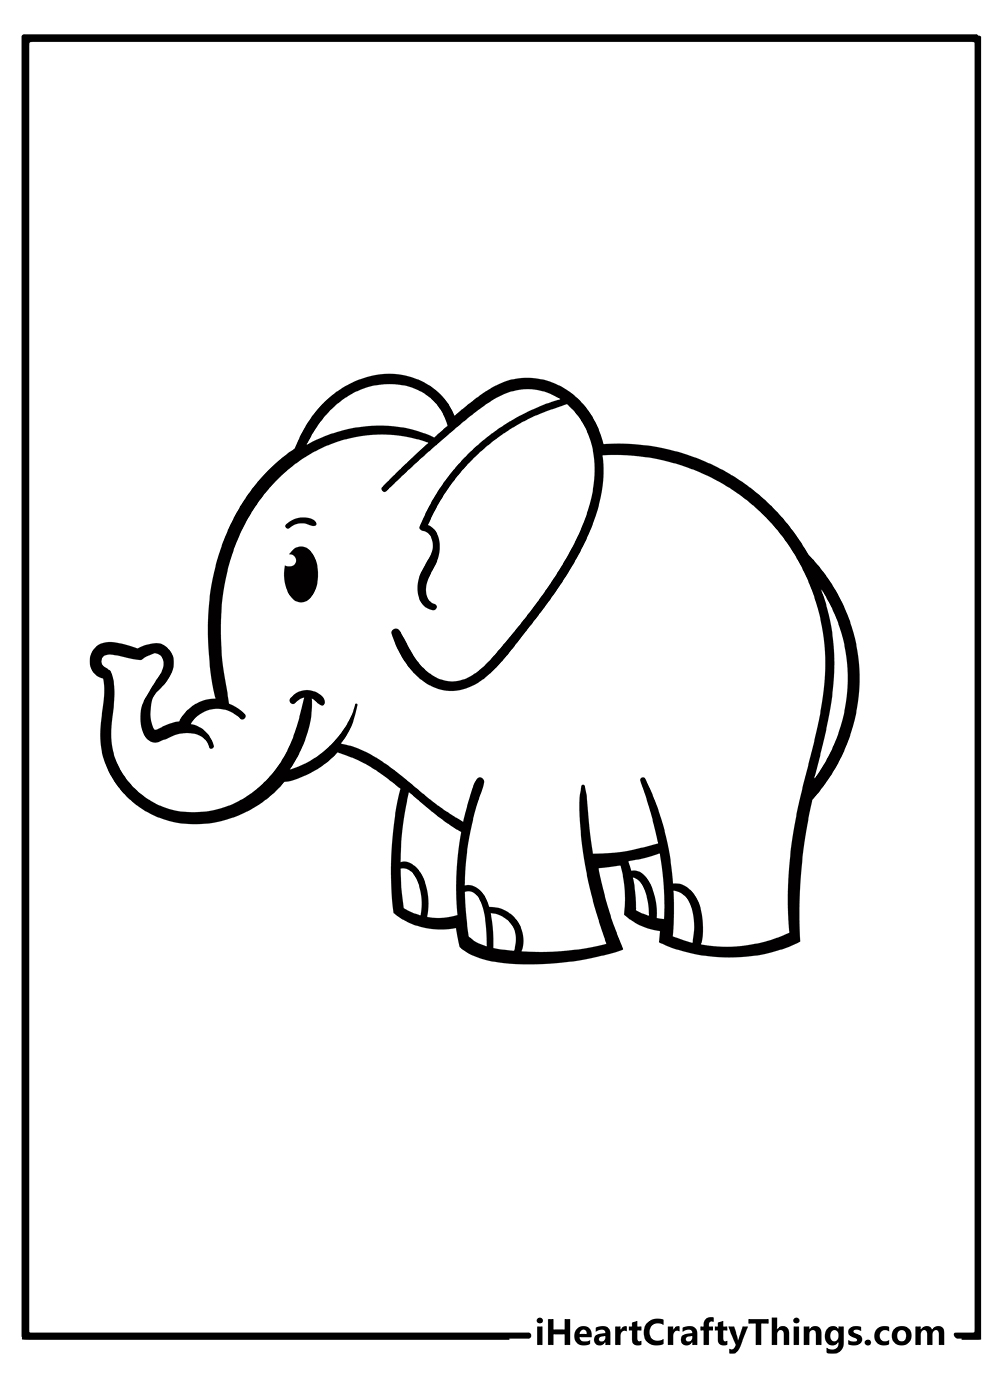 Elephant Coloring Pages for kids free download